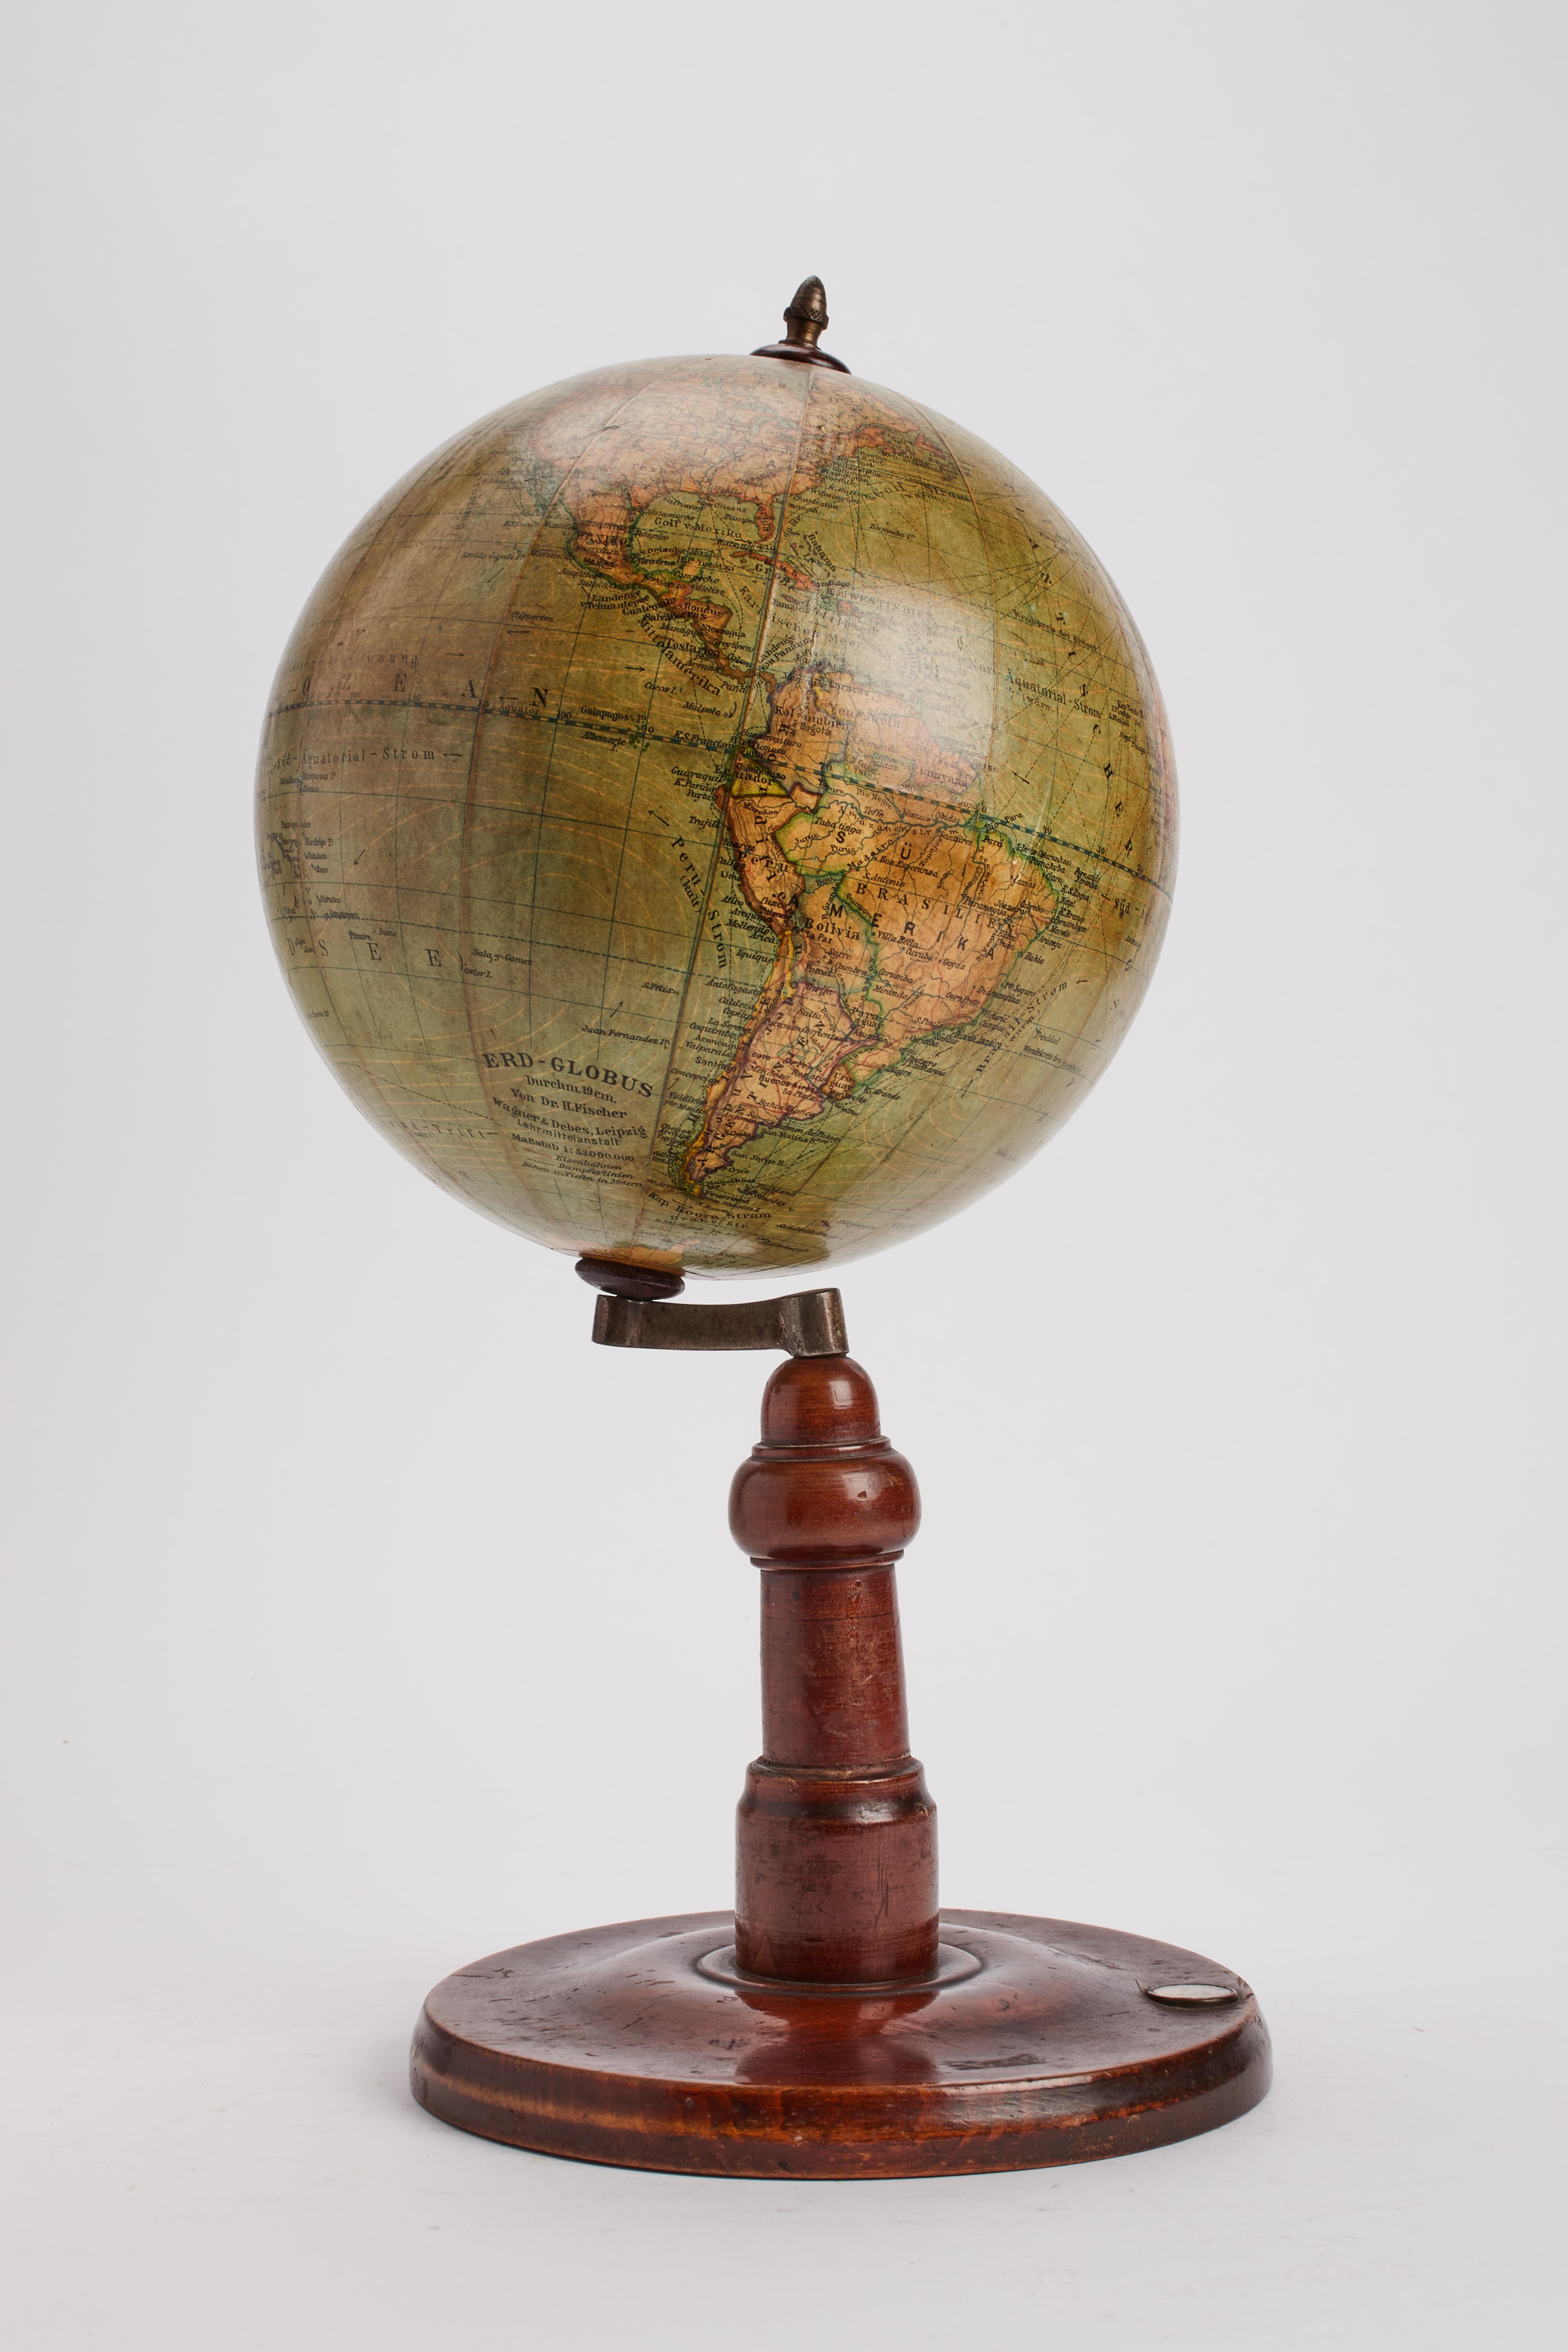 Wheel turned oak wood base, with round foot, moved profile and leg, with original patina. Terrestrial globe, edited by Wagner & Debes, Lipzig. The globe is made out of papier maché, finished with pastiglia ( refined chalk ) and completed by the